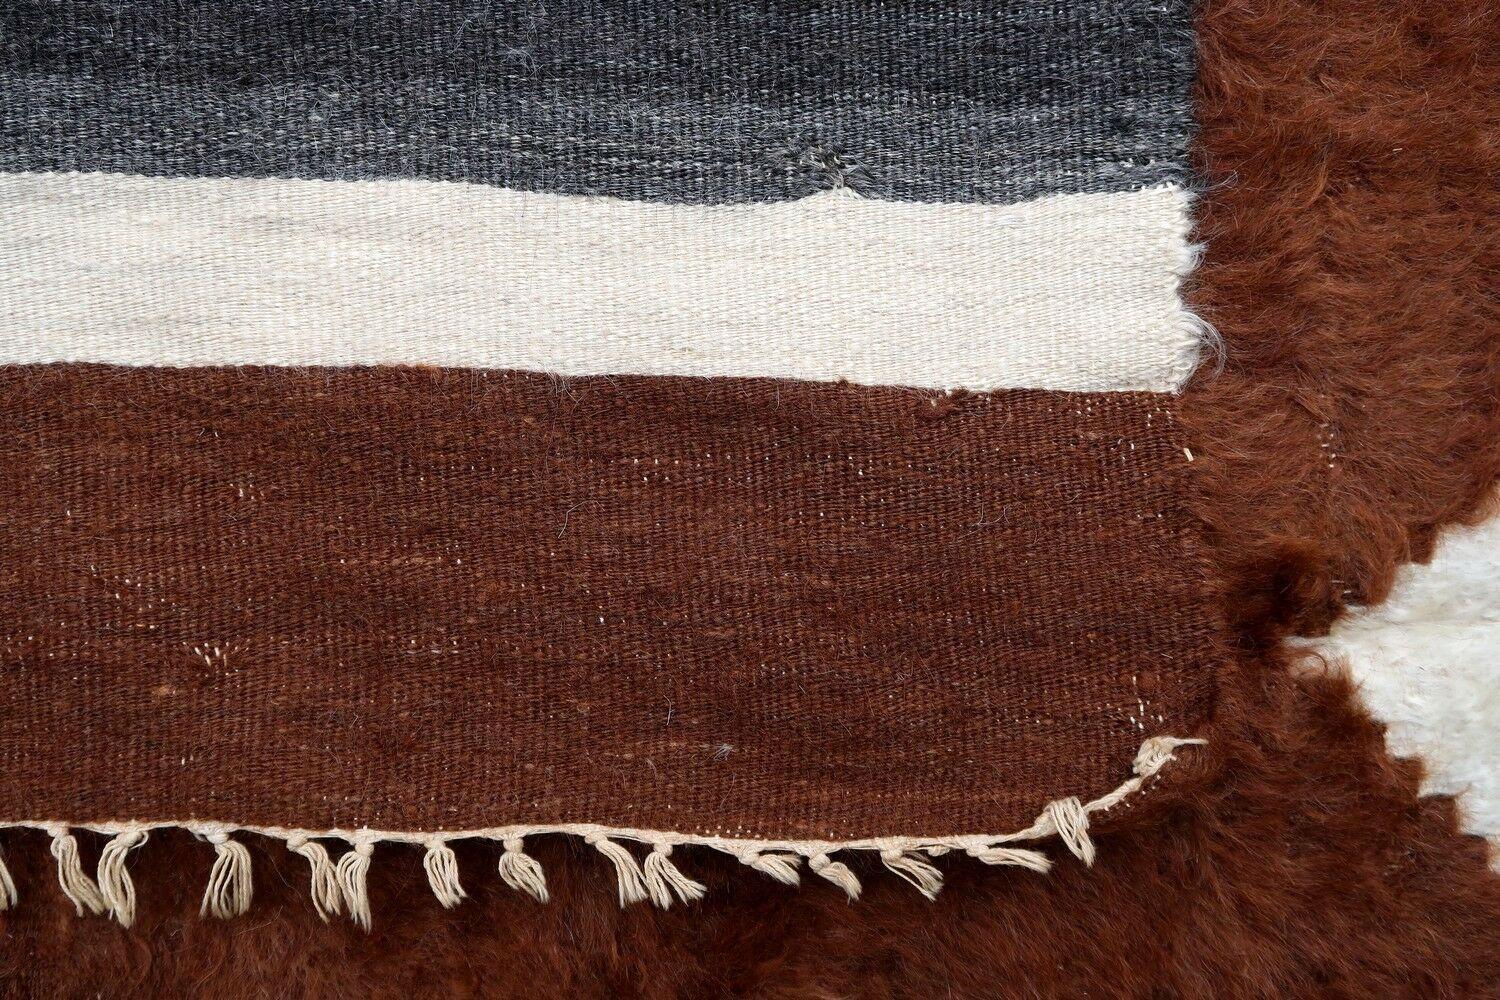 Vintage rug from Syria made in Angora wool in brown color. The rug is from the middle of 20th century in original good condition.

- Condition: original good,

- circa: 1950s,

- Size: 4' x 5.9' (124cm x 180cm),

- Material: Angora